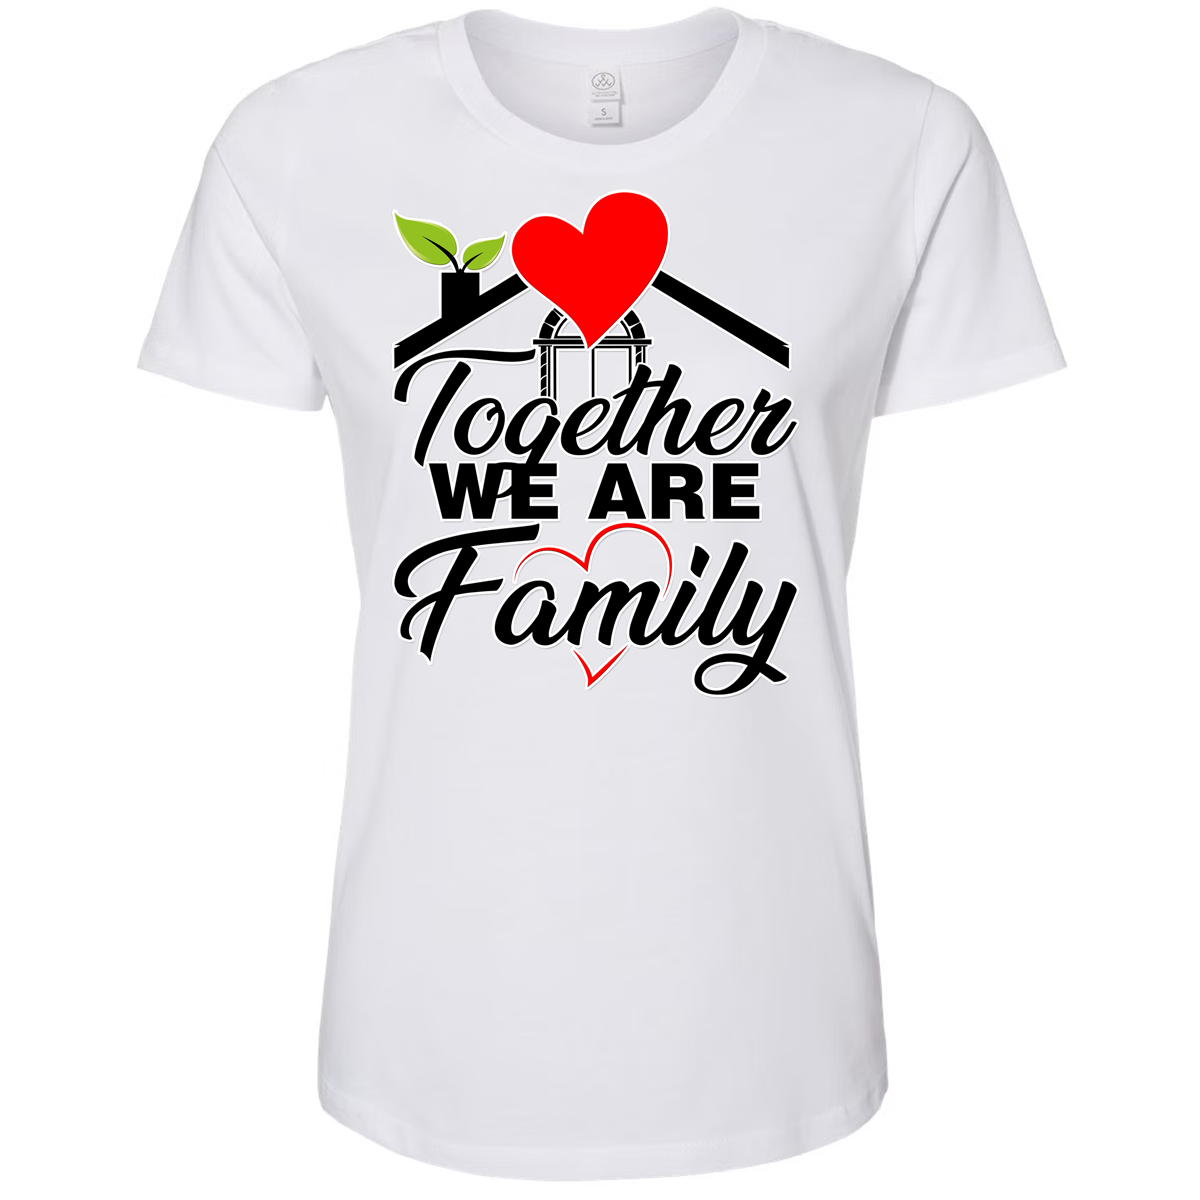 Together we are family T-Shirt - Wilson Design Group